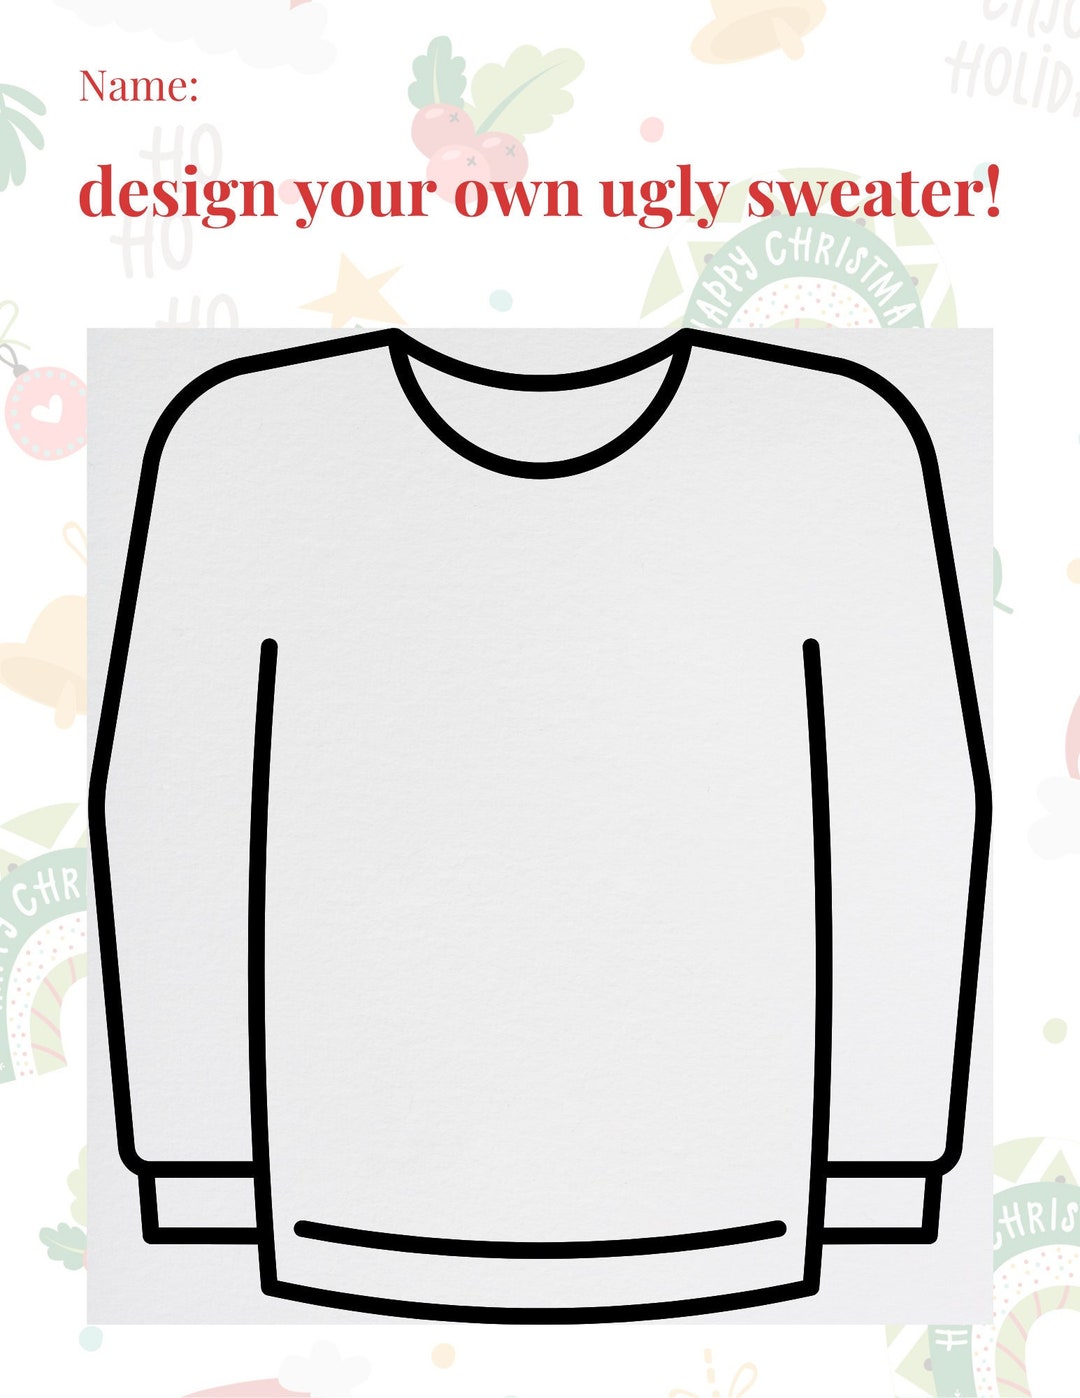 Design Your Own Ugly Sweater - Etsy